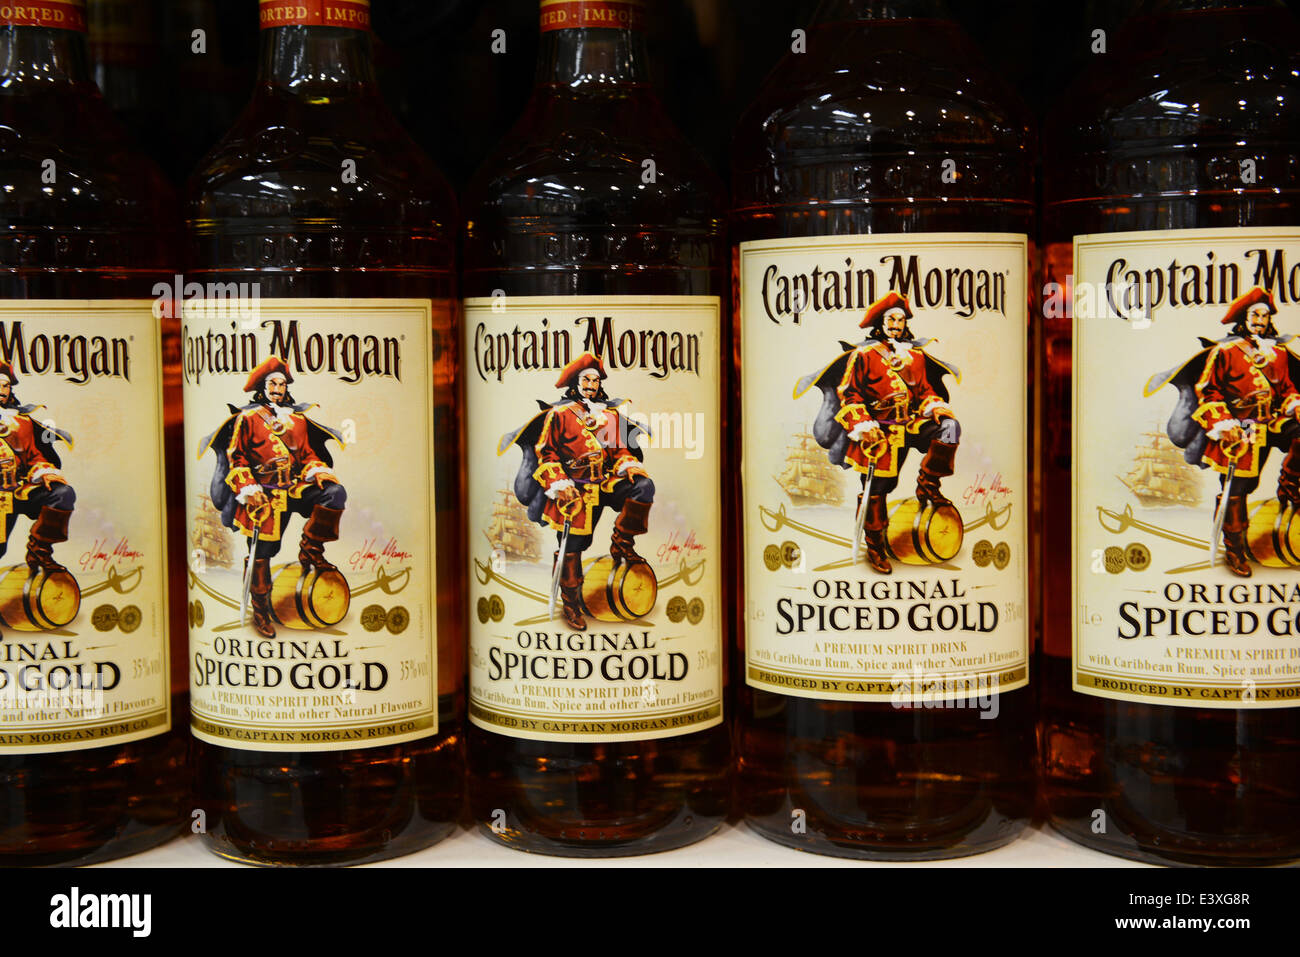 CAPTAIN MORGAN ORIGINAL SPICED RUM LEVELS UP THE LIQUID & LOOK, NOW MADE  EVEN BE